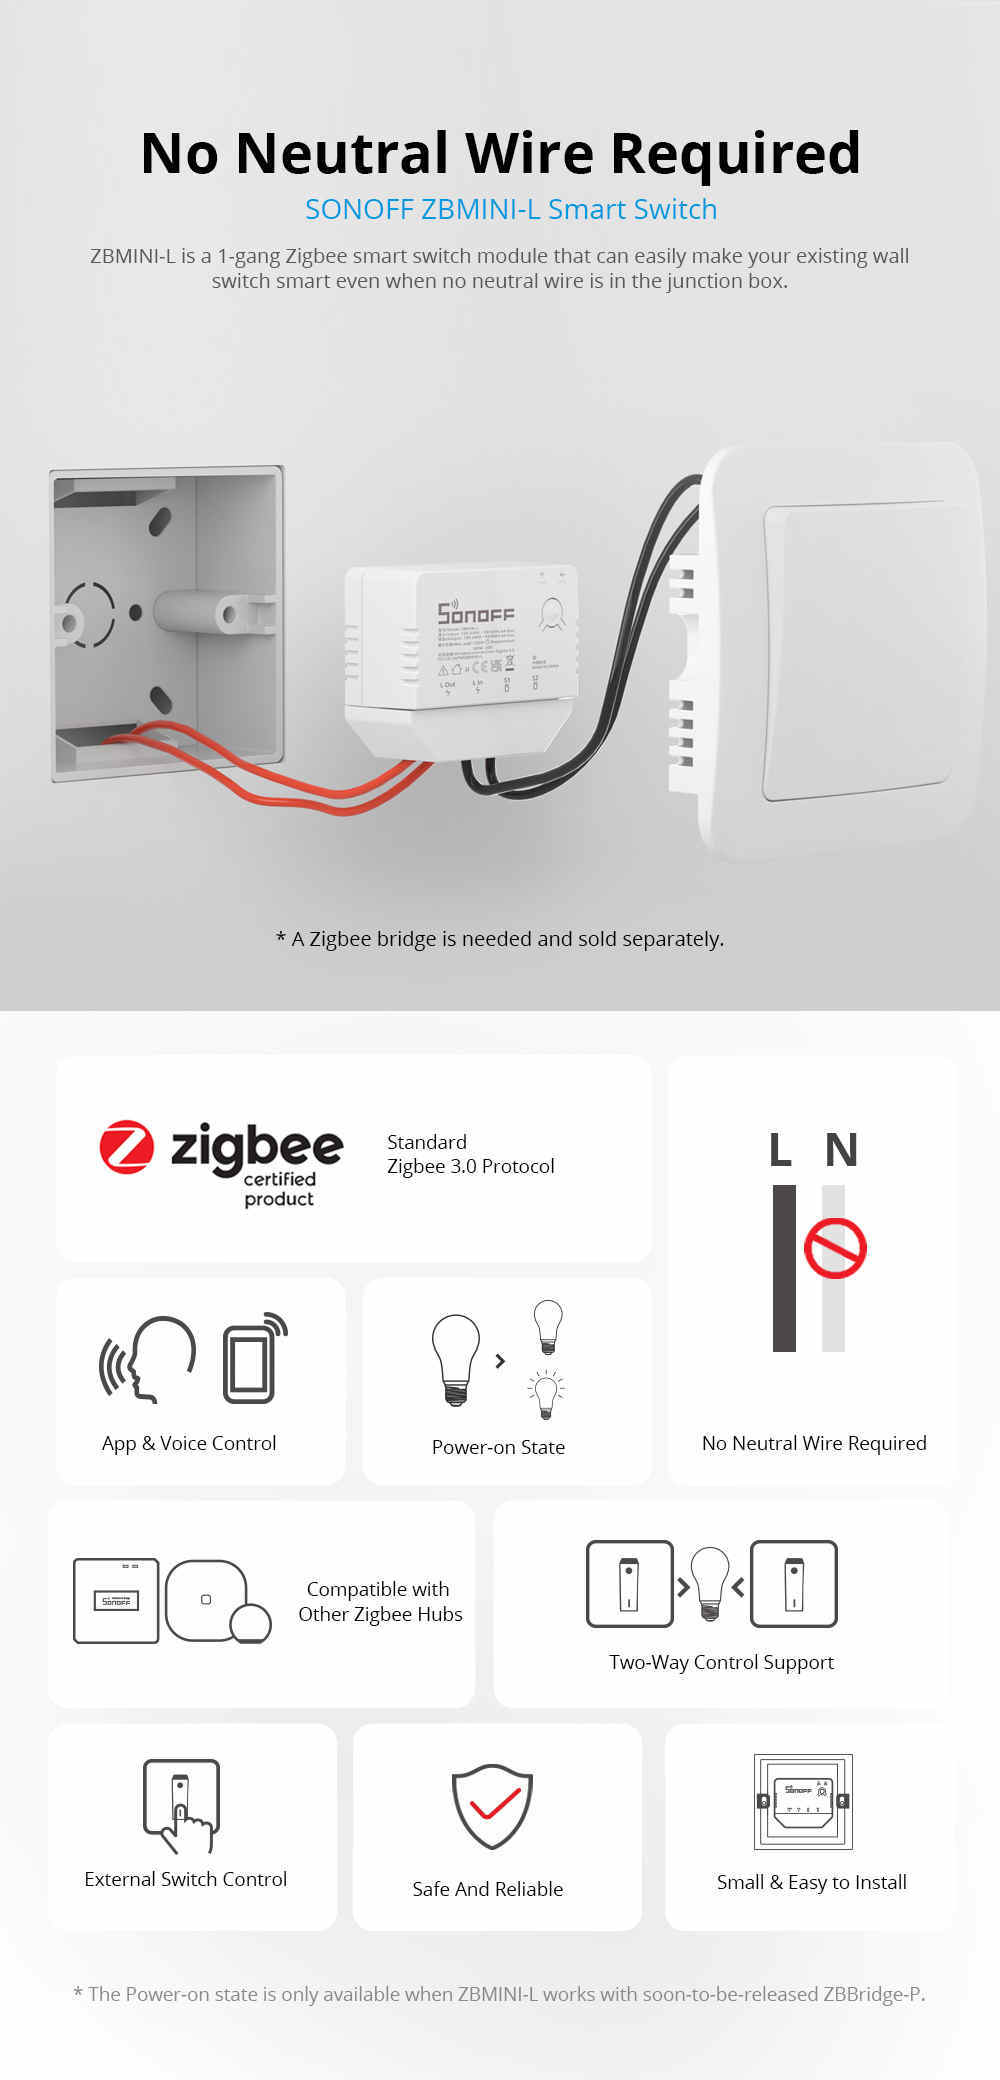 ZBMINI-L Zigbee 3.0 Smart Switch- No Neutral Wire Required